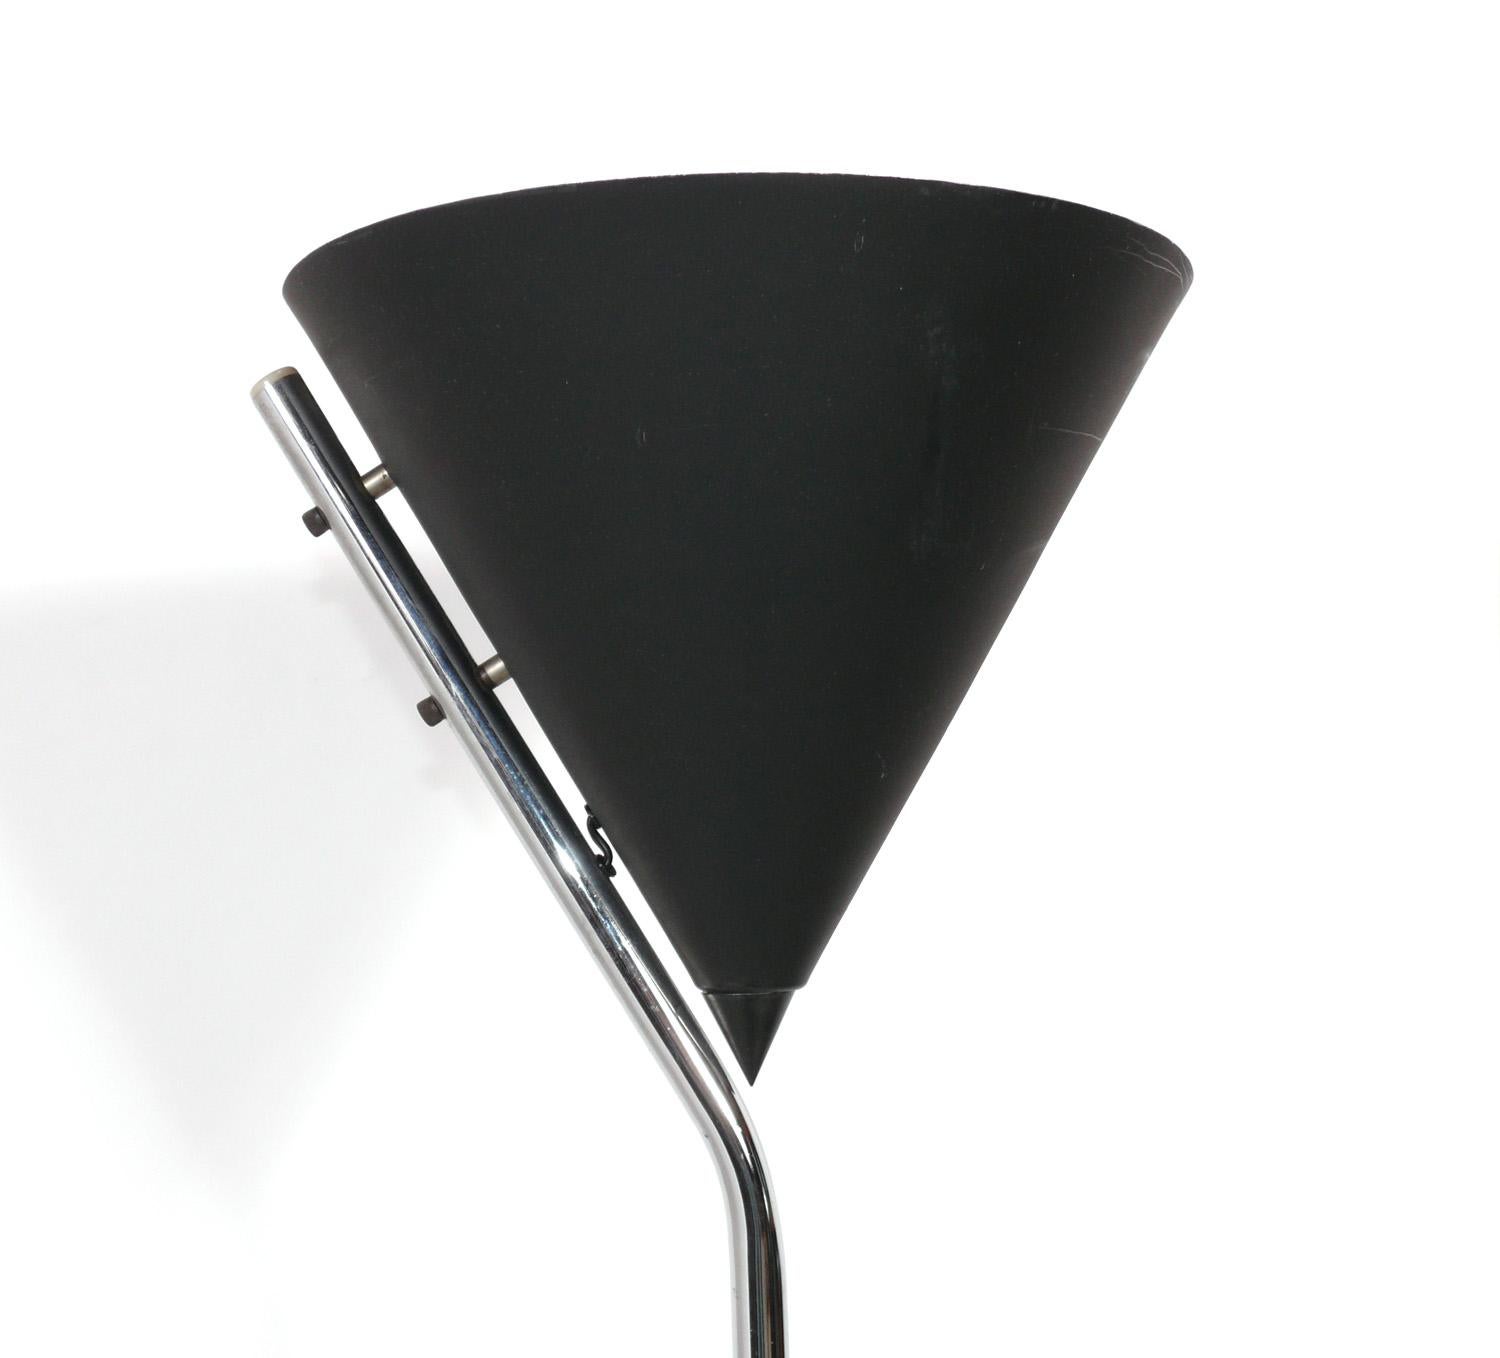 Sculptural Black and Chrome Floor Lamp, designed by Robert Sonneman, American, circa 1970s. It has been rewired and is ready to use.